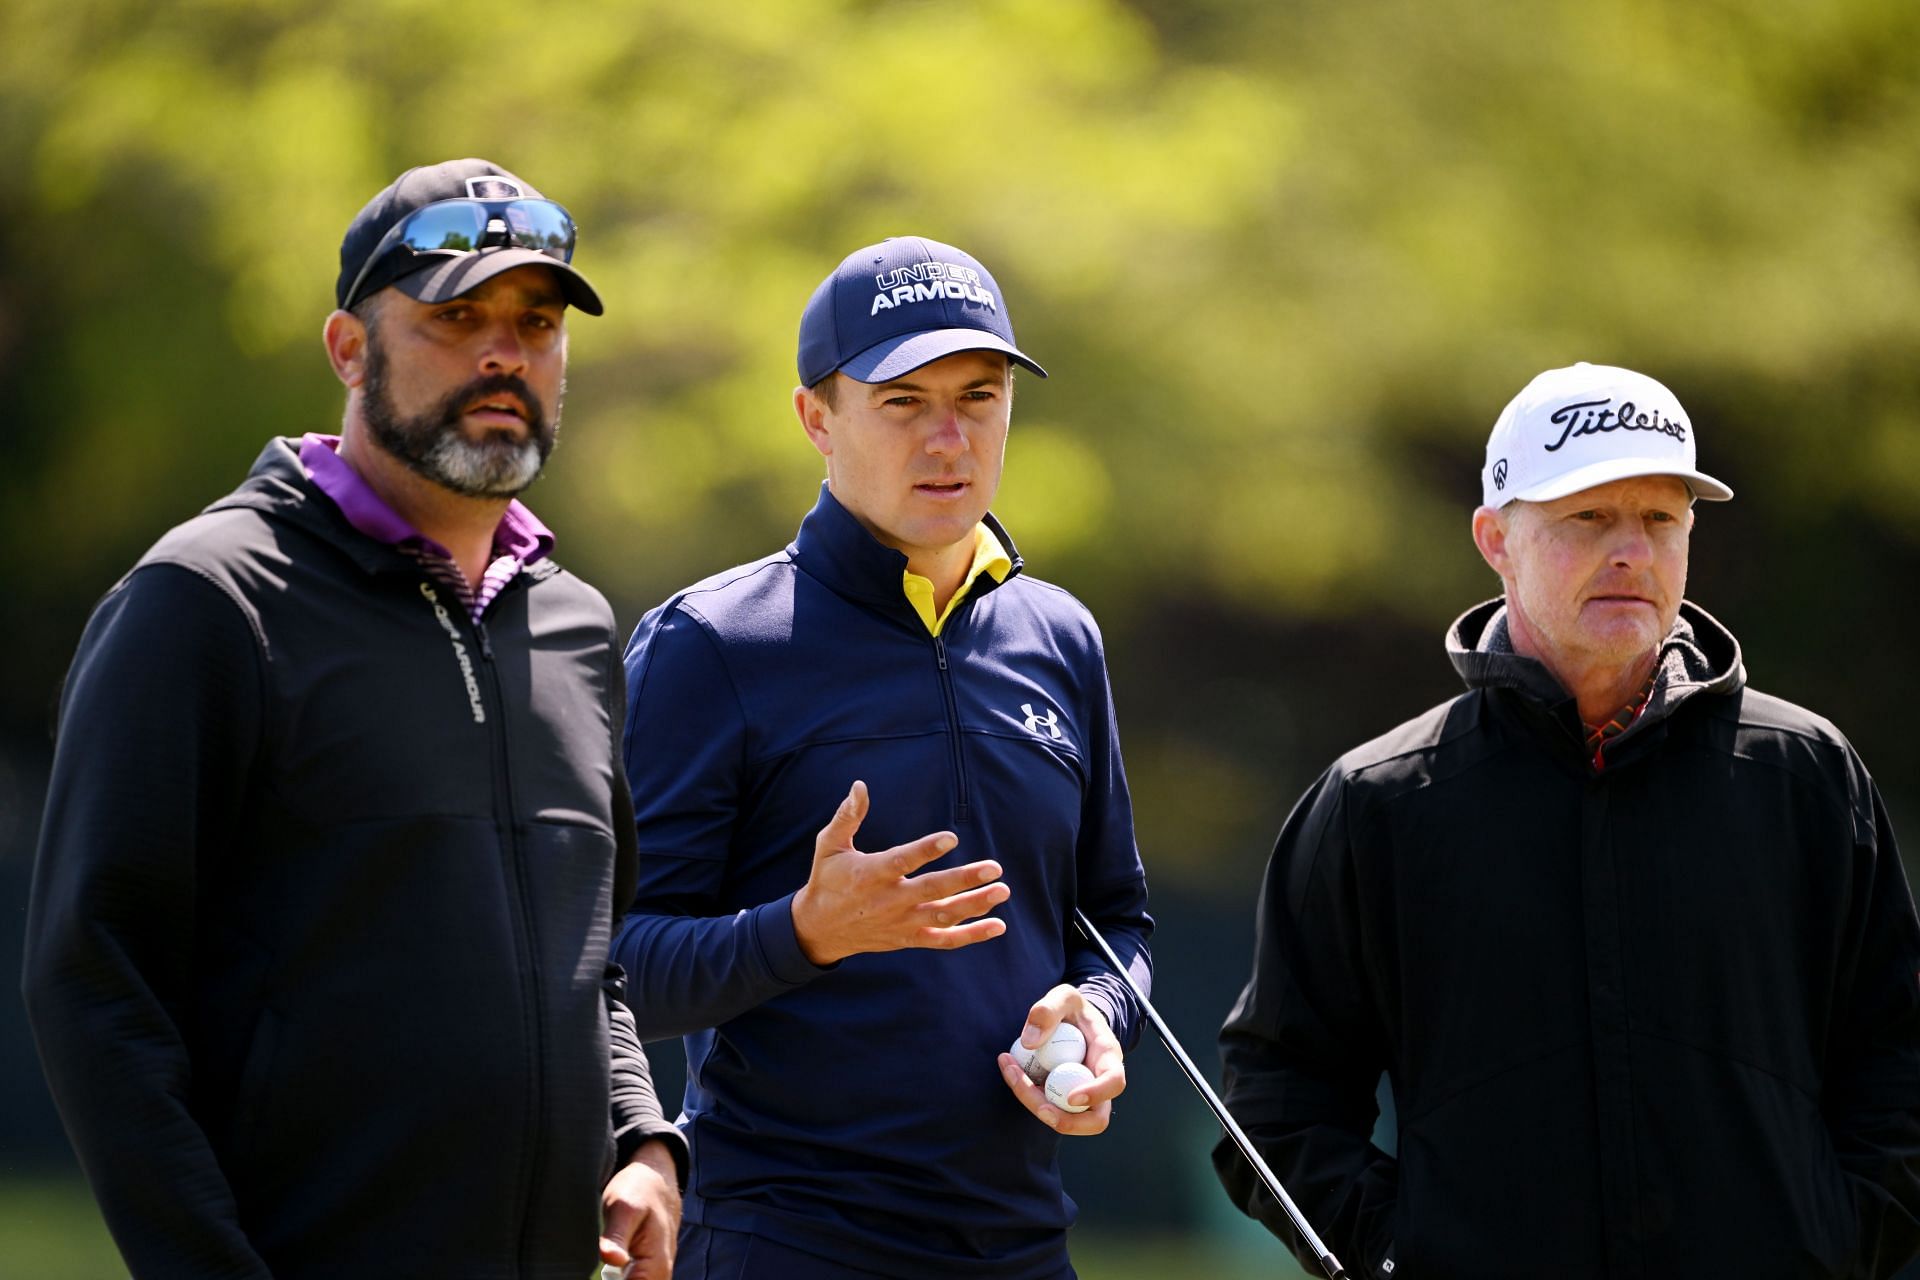 Caddie Michael Greller, Jordan Spieth, and coach Cameron McCormick during the practice round ahead of the 2023 PGA Championship